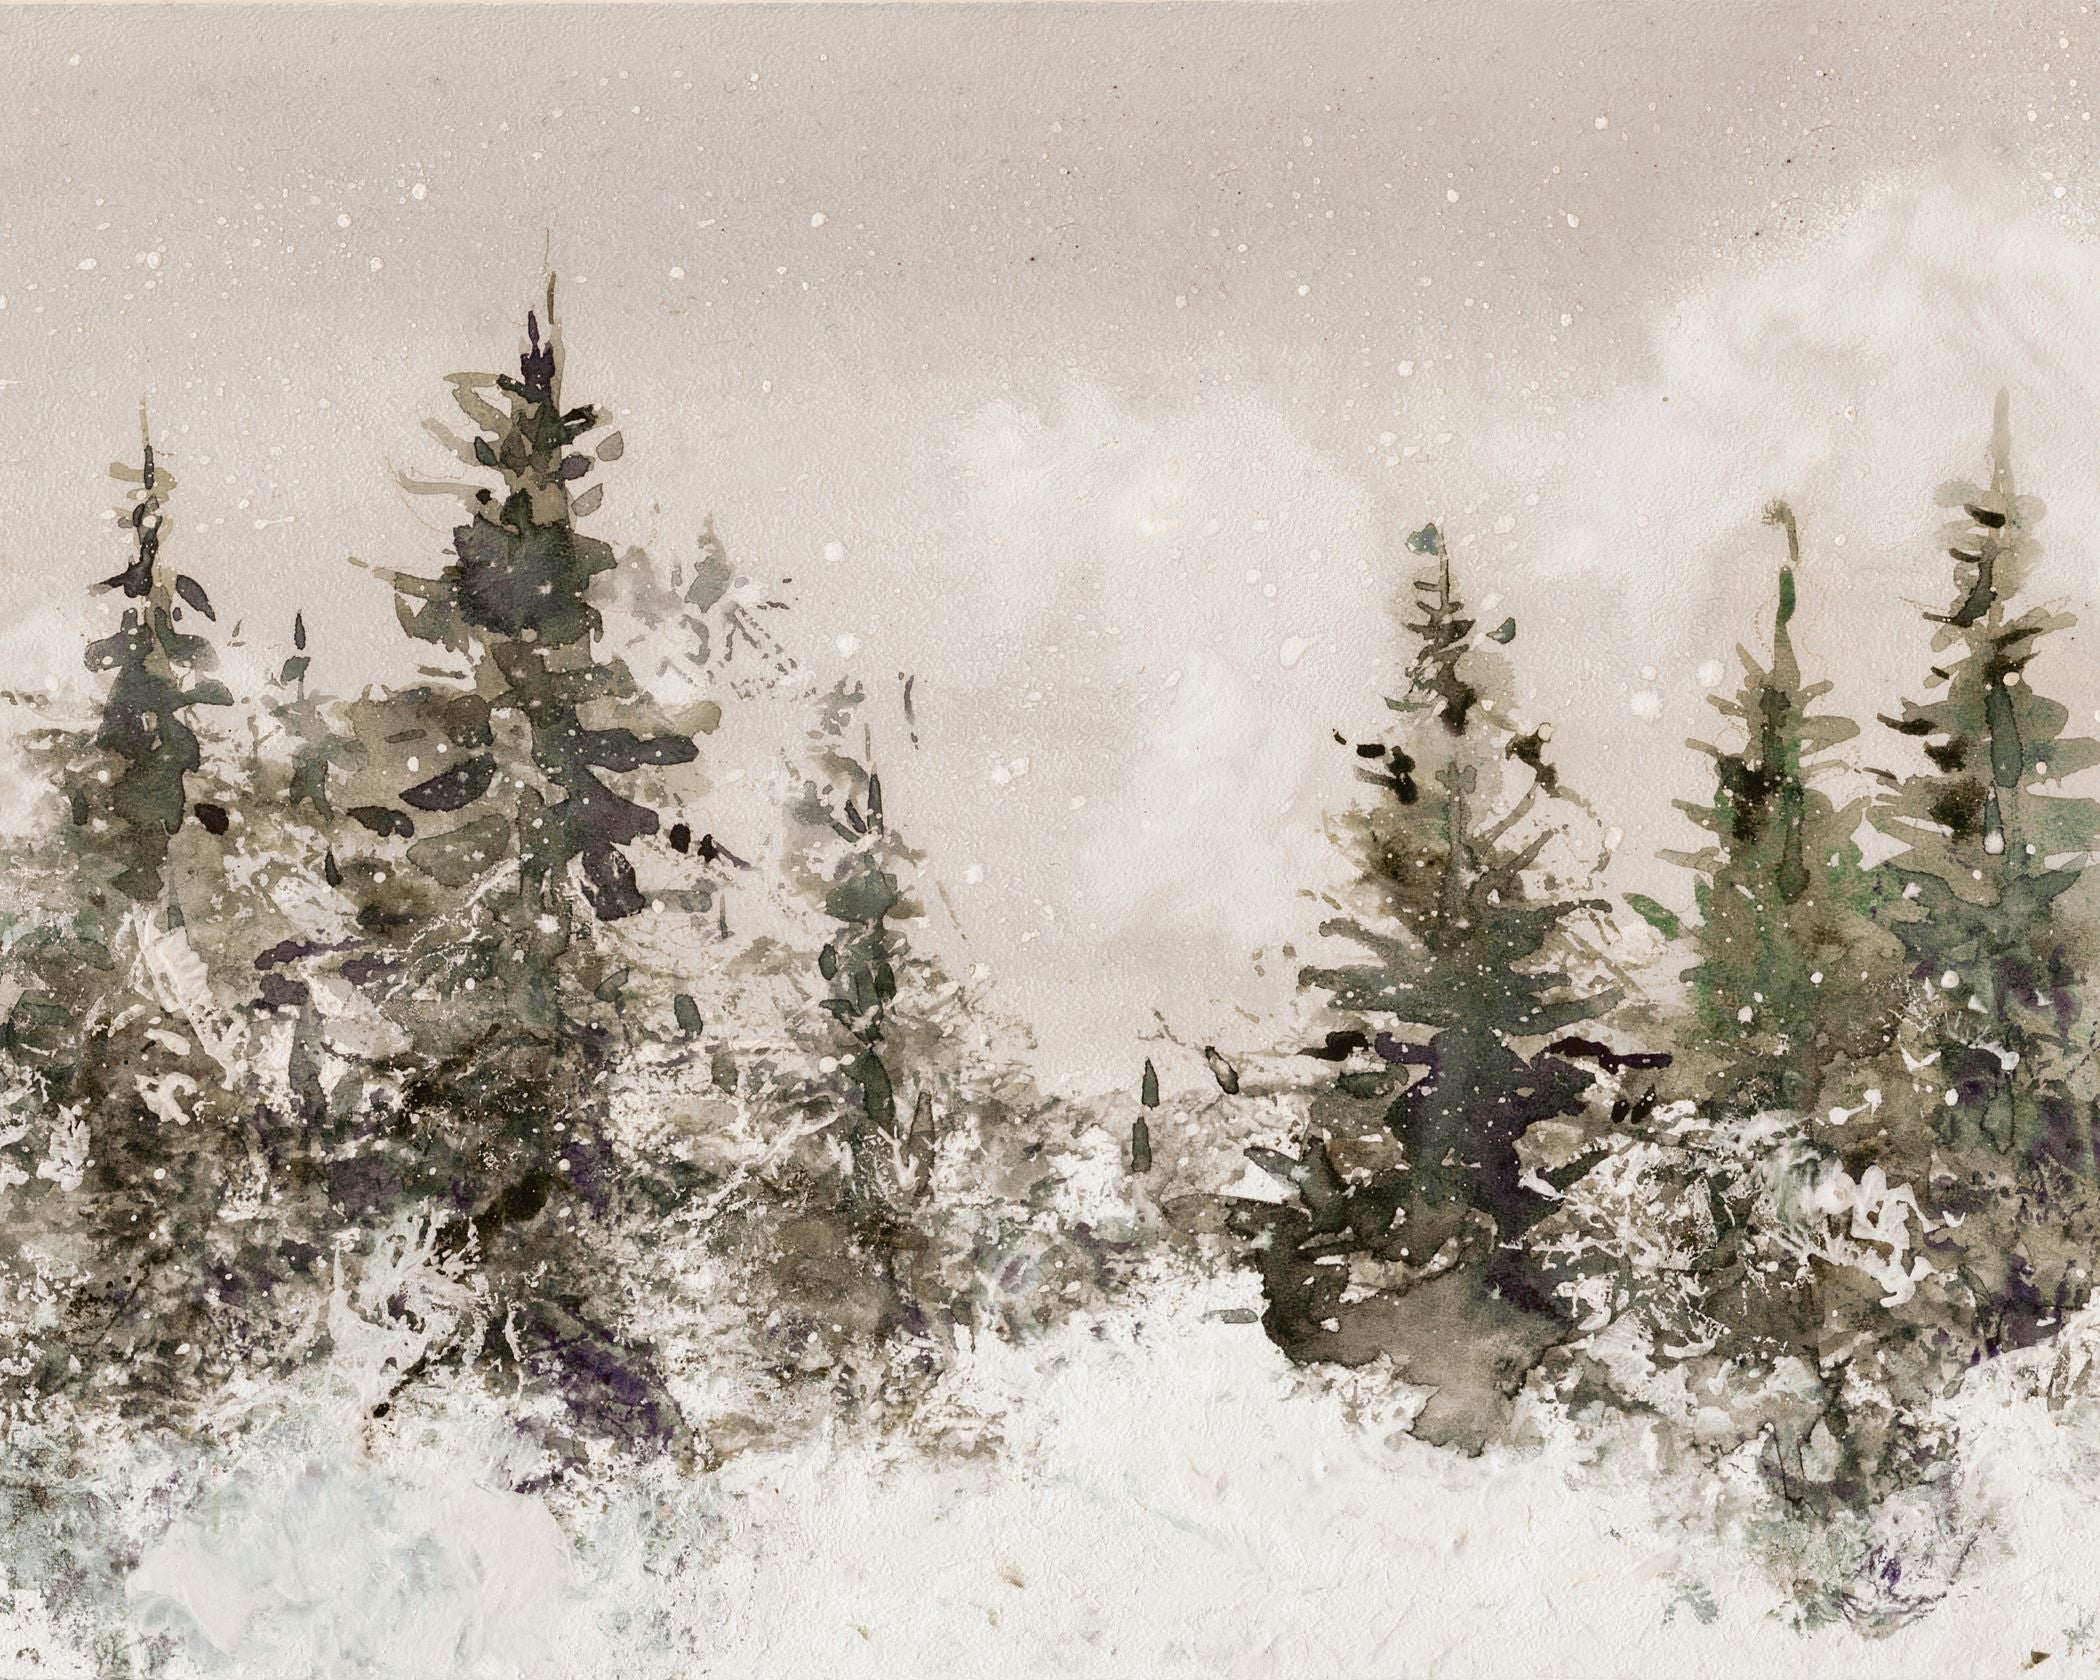 Snow Covered Pines